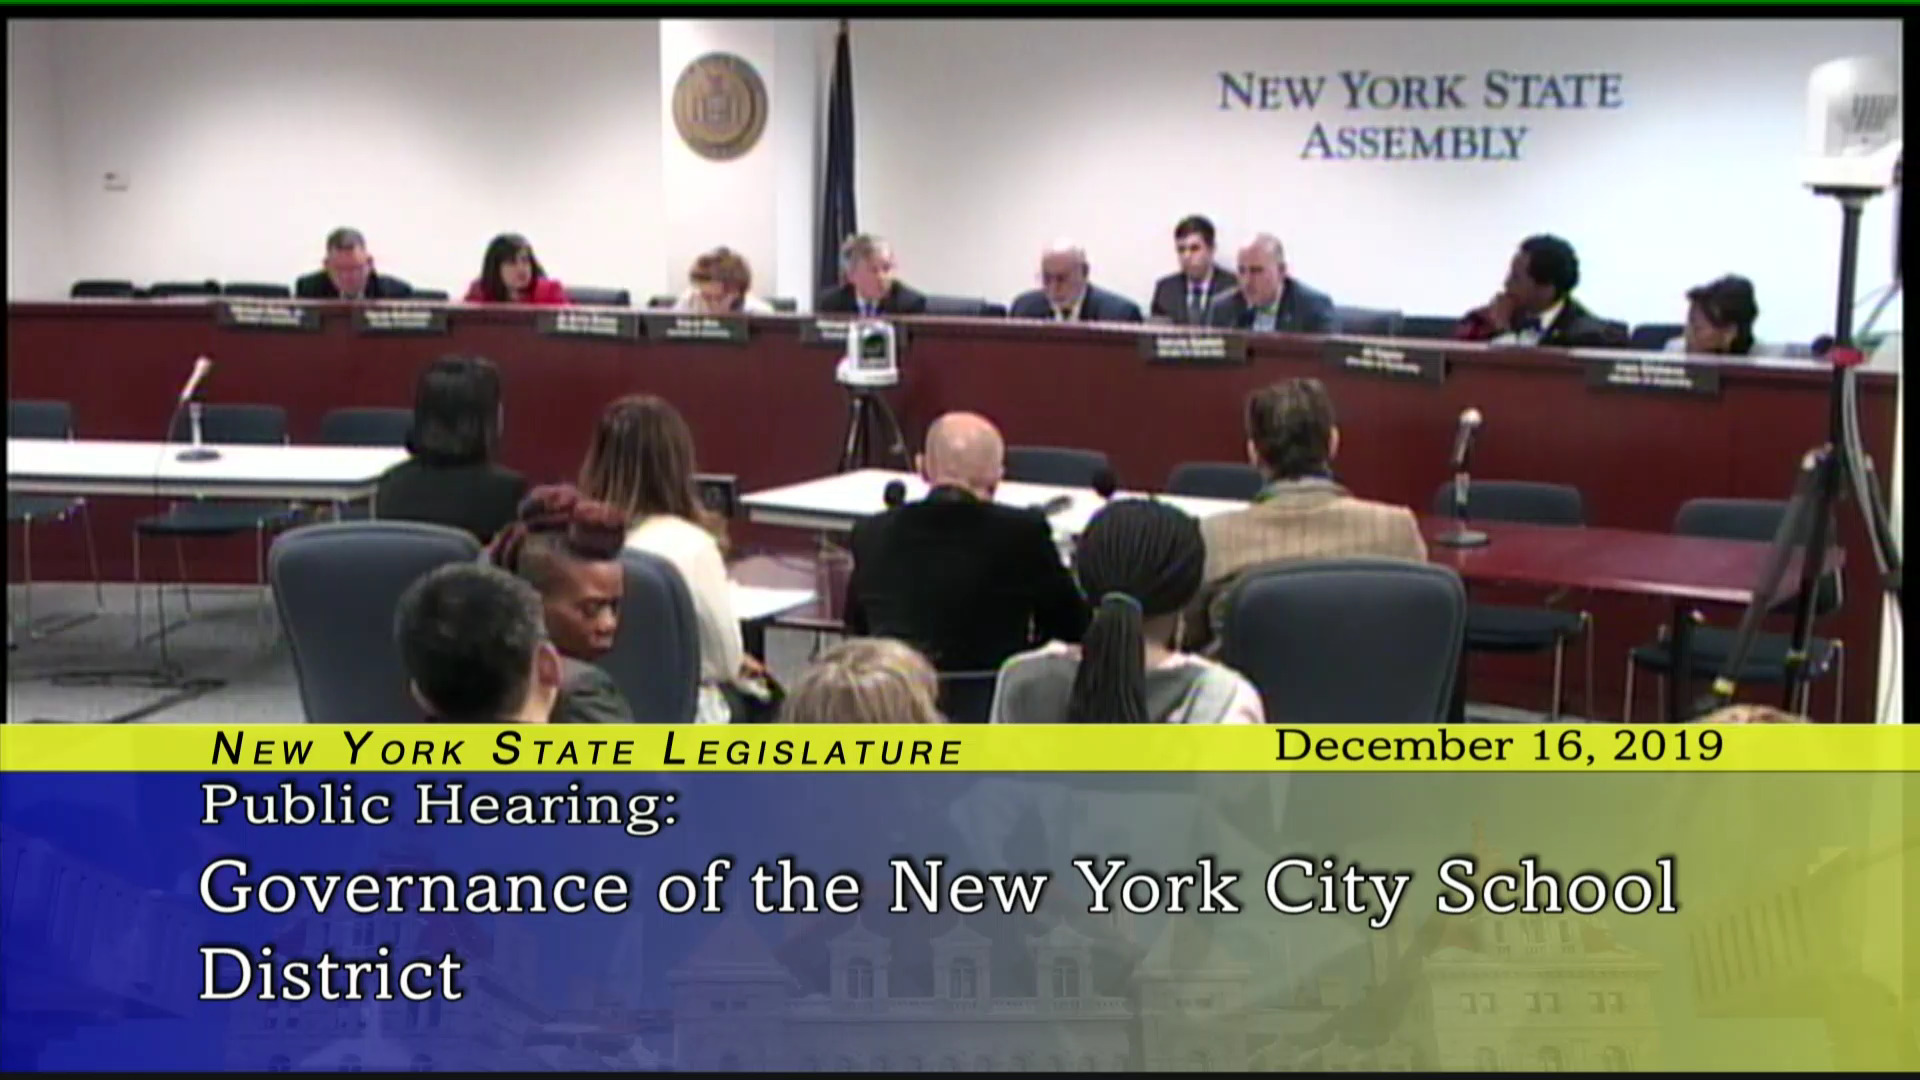 Public Hearing On Governance of the New York City School District (1)